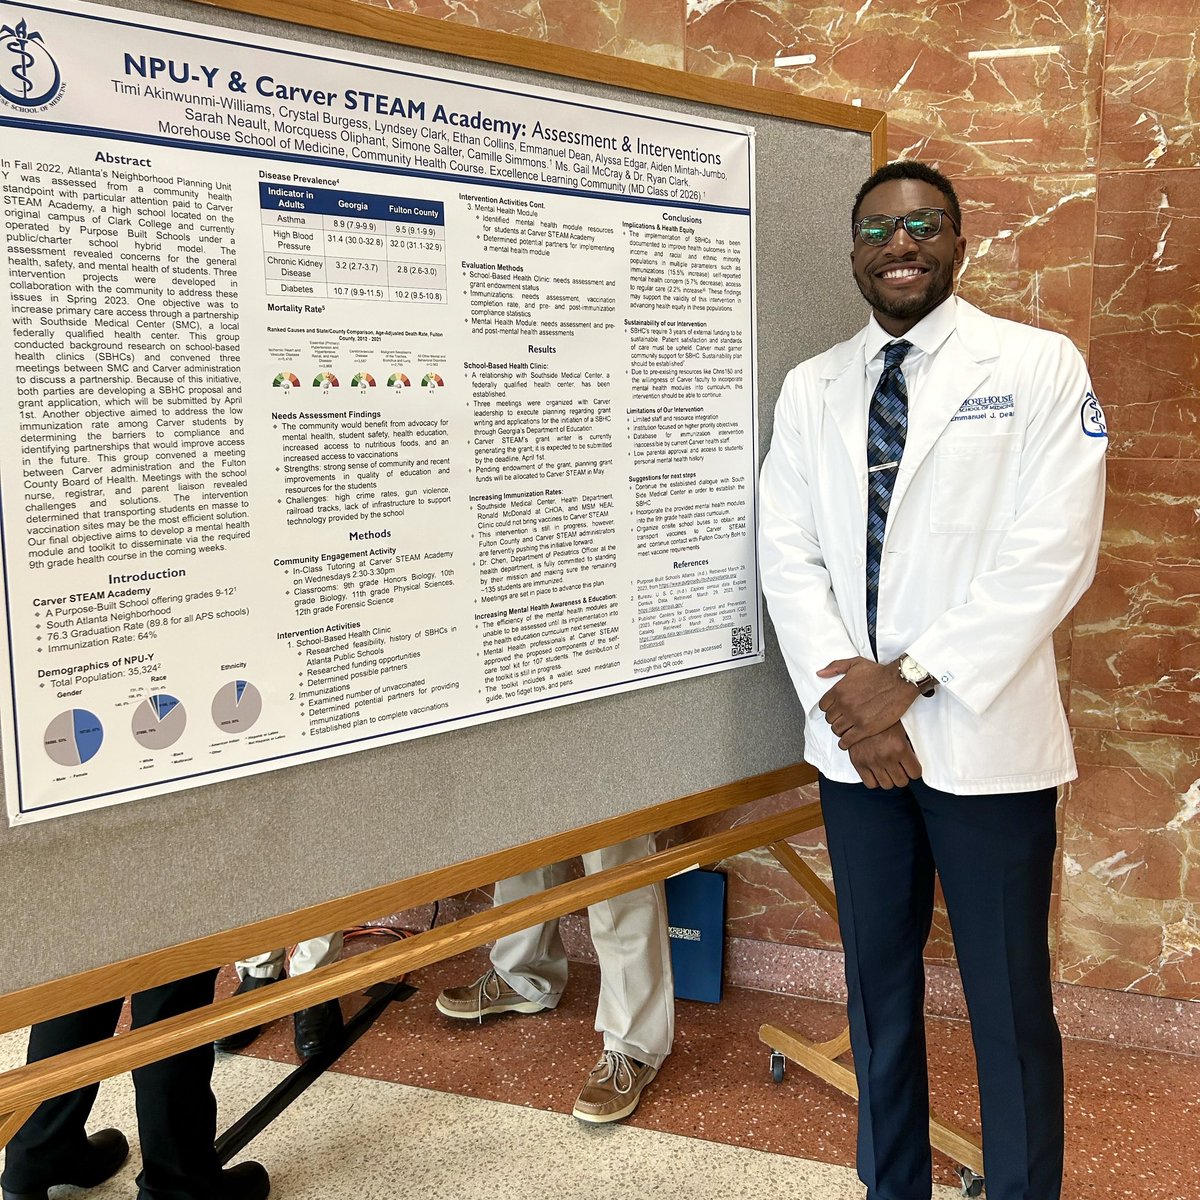 Honored to present our community health research regarding our assessment and interventions at Carver STEAM Academy & the NPU-Y community at the 2023 Daniel S. Blumenthal, MD MPH Public Health Symposium! 
@MSMEDU @AAMCtoday 
#research #symposium #posterpresentation